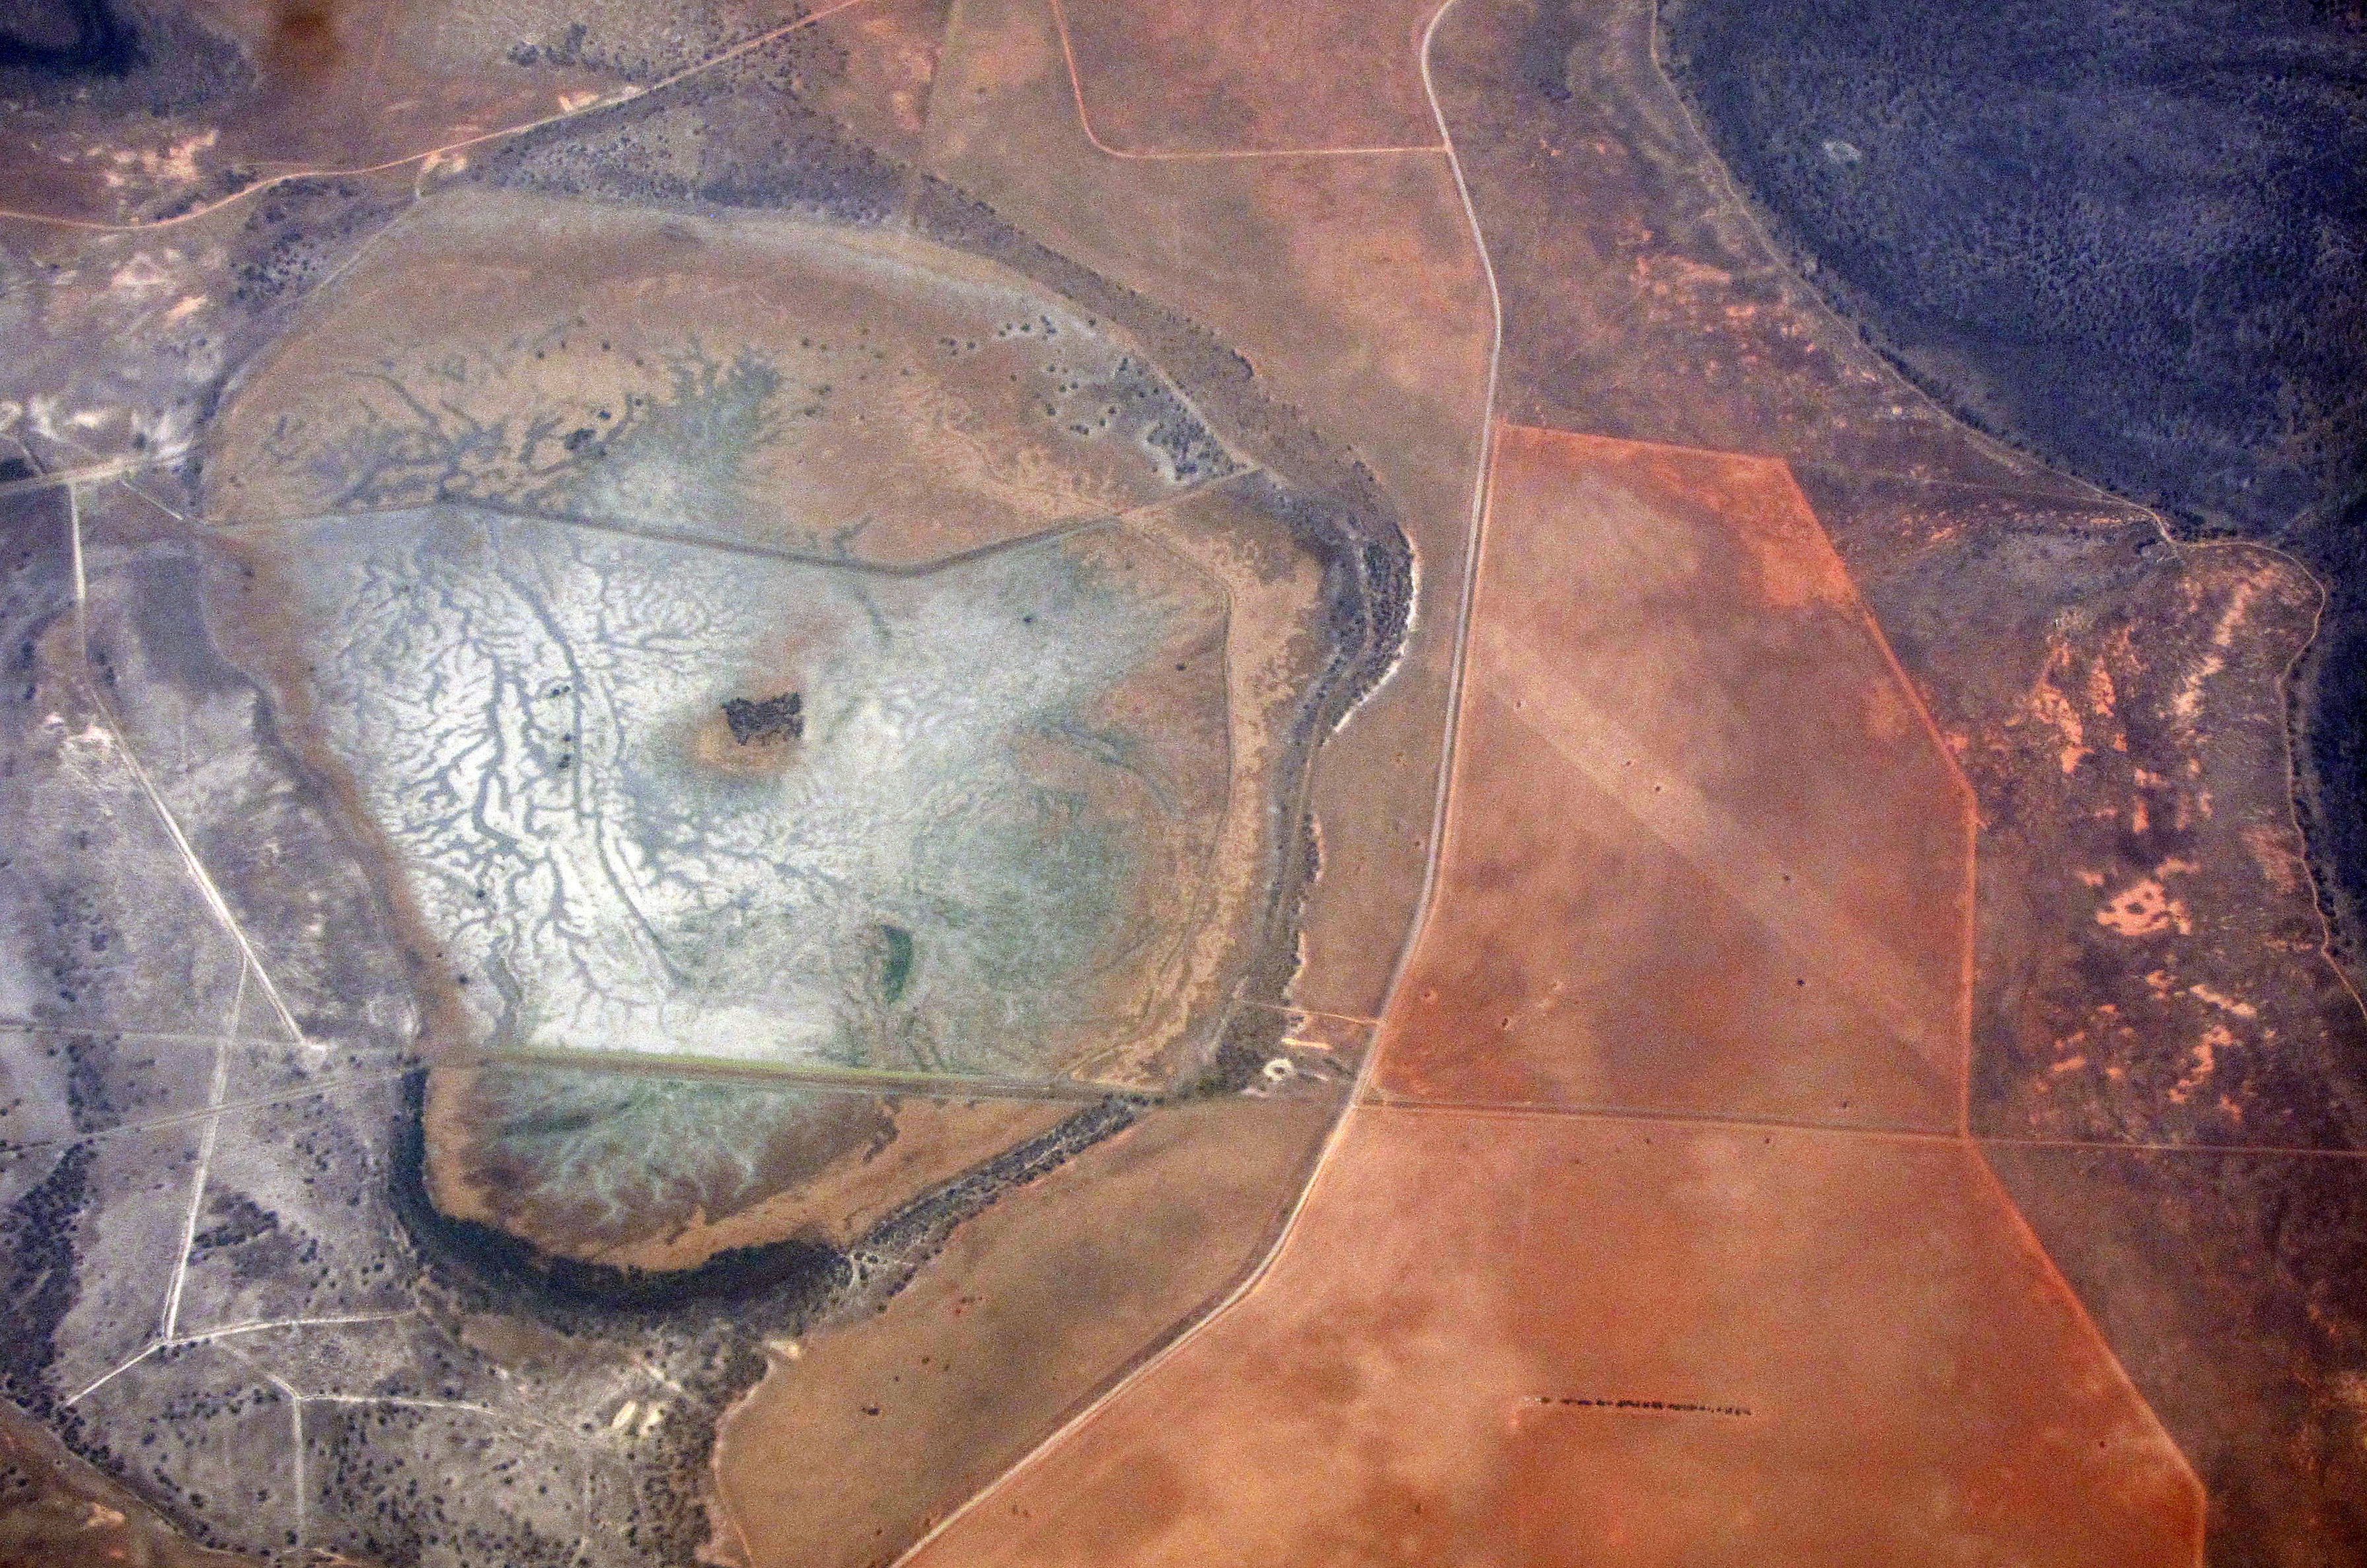 A salt-affected catchment area can be seen among drought-affected farmland in southern Australia, the World Meteorological Organization said, November 26, 2015. This will be the hottest year on record and 2016 could be hotter due to the El Niño weather pattern.  And he warned, on Wednesday, that no action on climate change could raise average global temperatures by 6 degrees Celsius or more.  Global ocean temperatures were unprecedented during this period, and many land areas, including the continental United States, Australia, Europe, South America, and Russia, broke temperature records by large margins.  Photograph: David Gray/Reuters